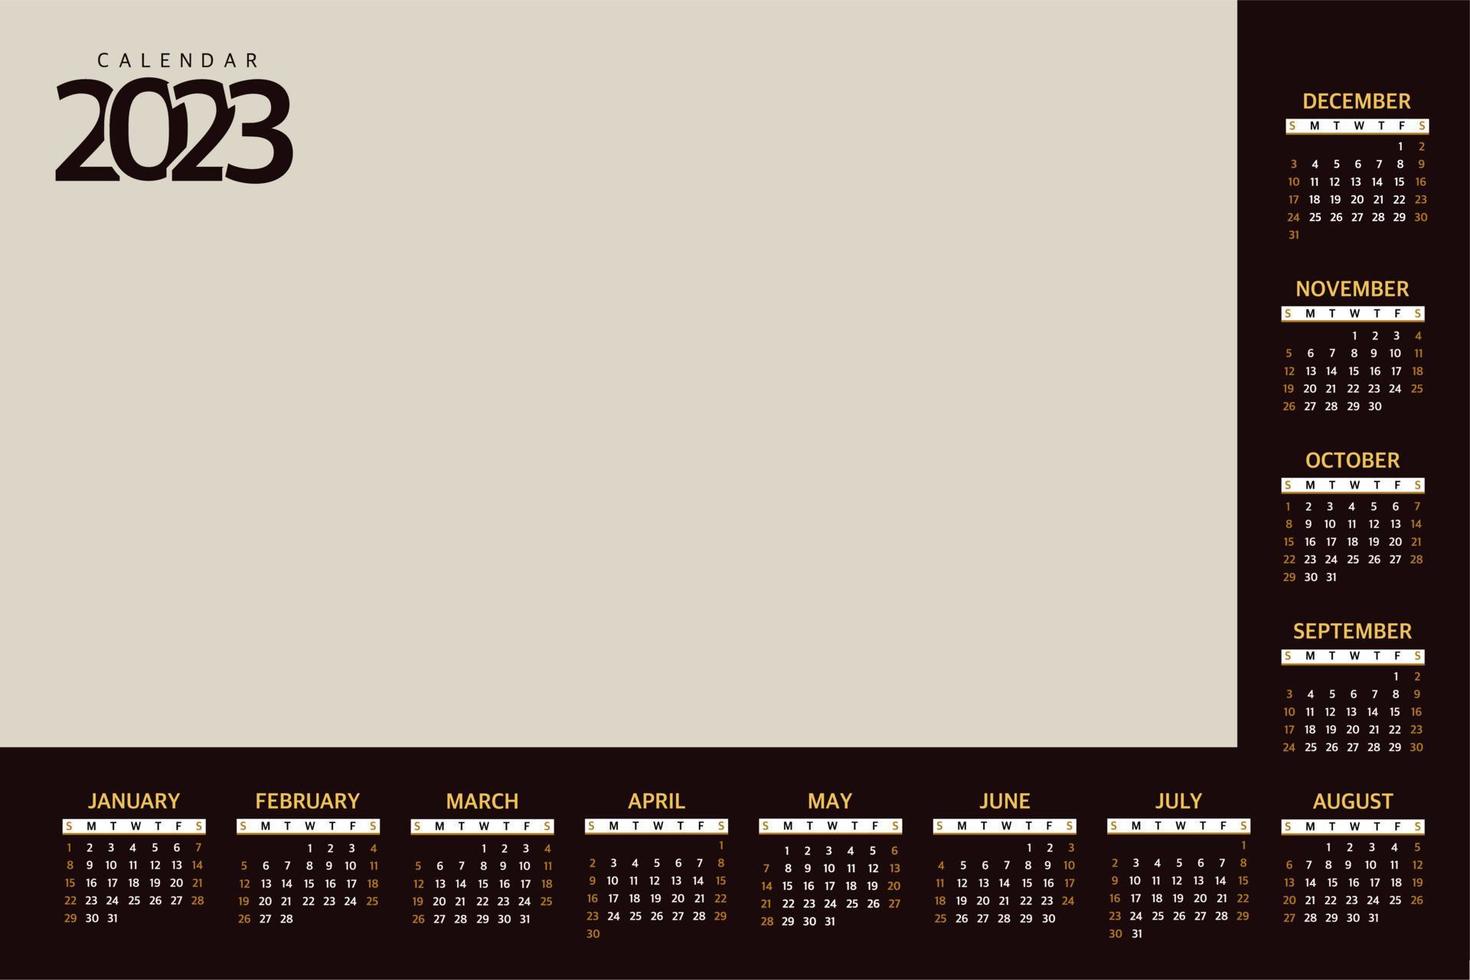 Calendar 2023 Planner template, the beginning of the week on Sunday. Vector illustration on a black background